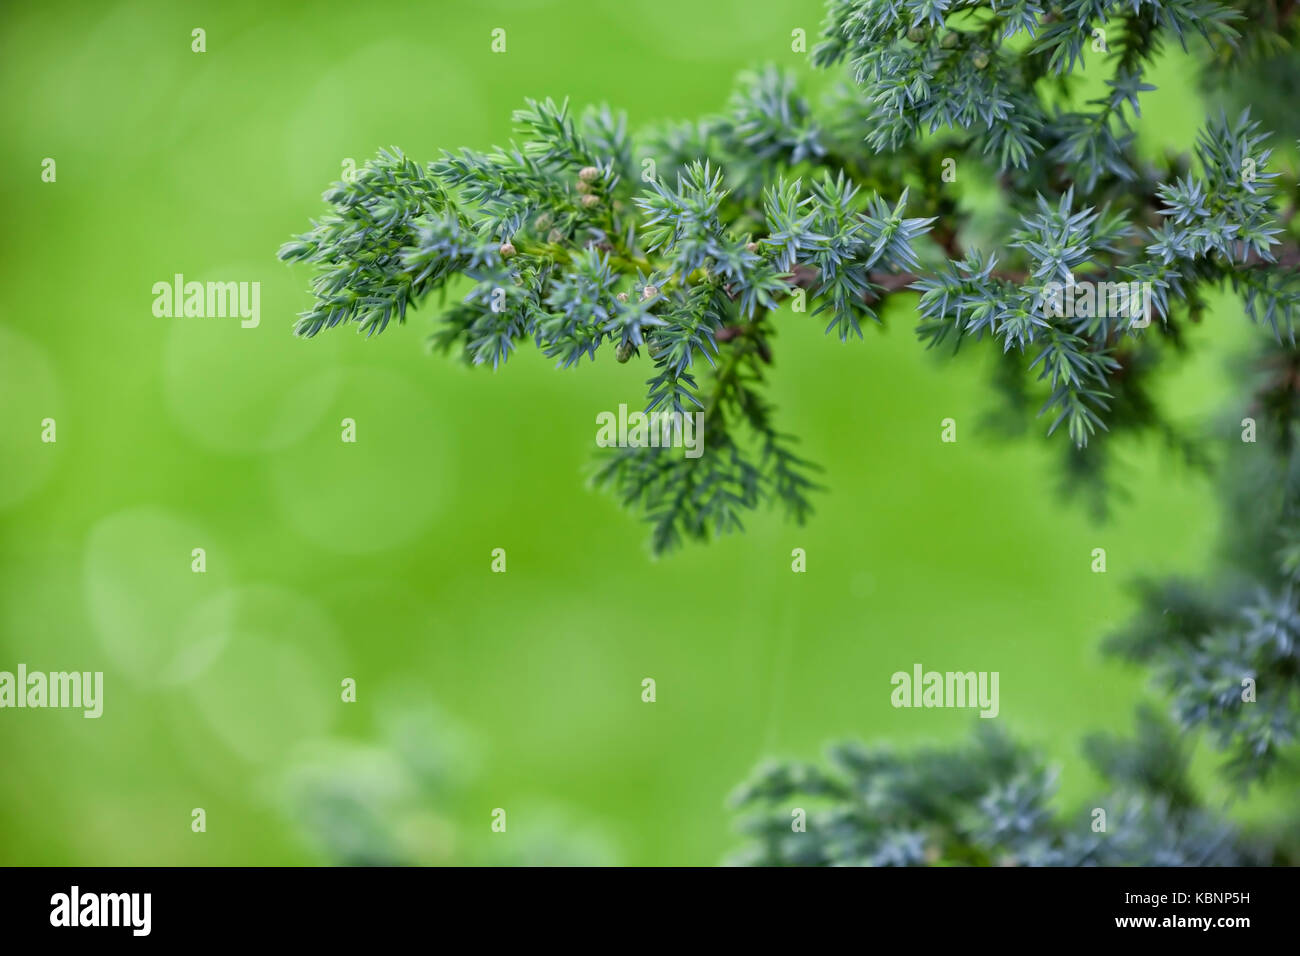 Picea pungens in the garden. Stock Photo